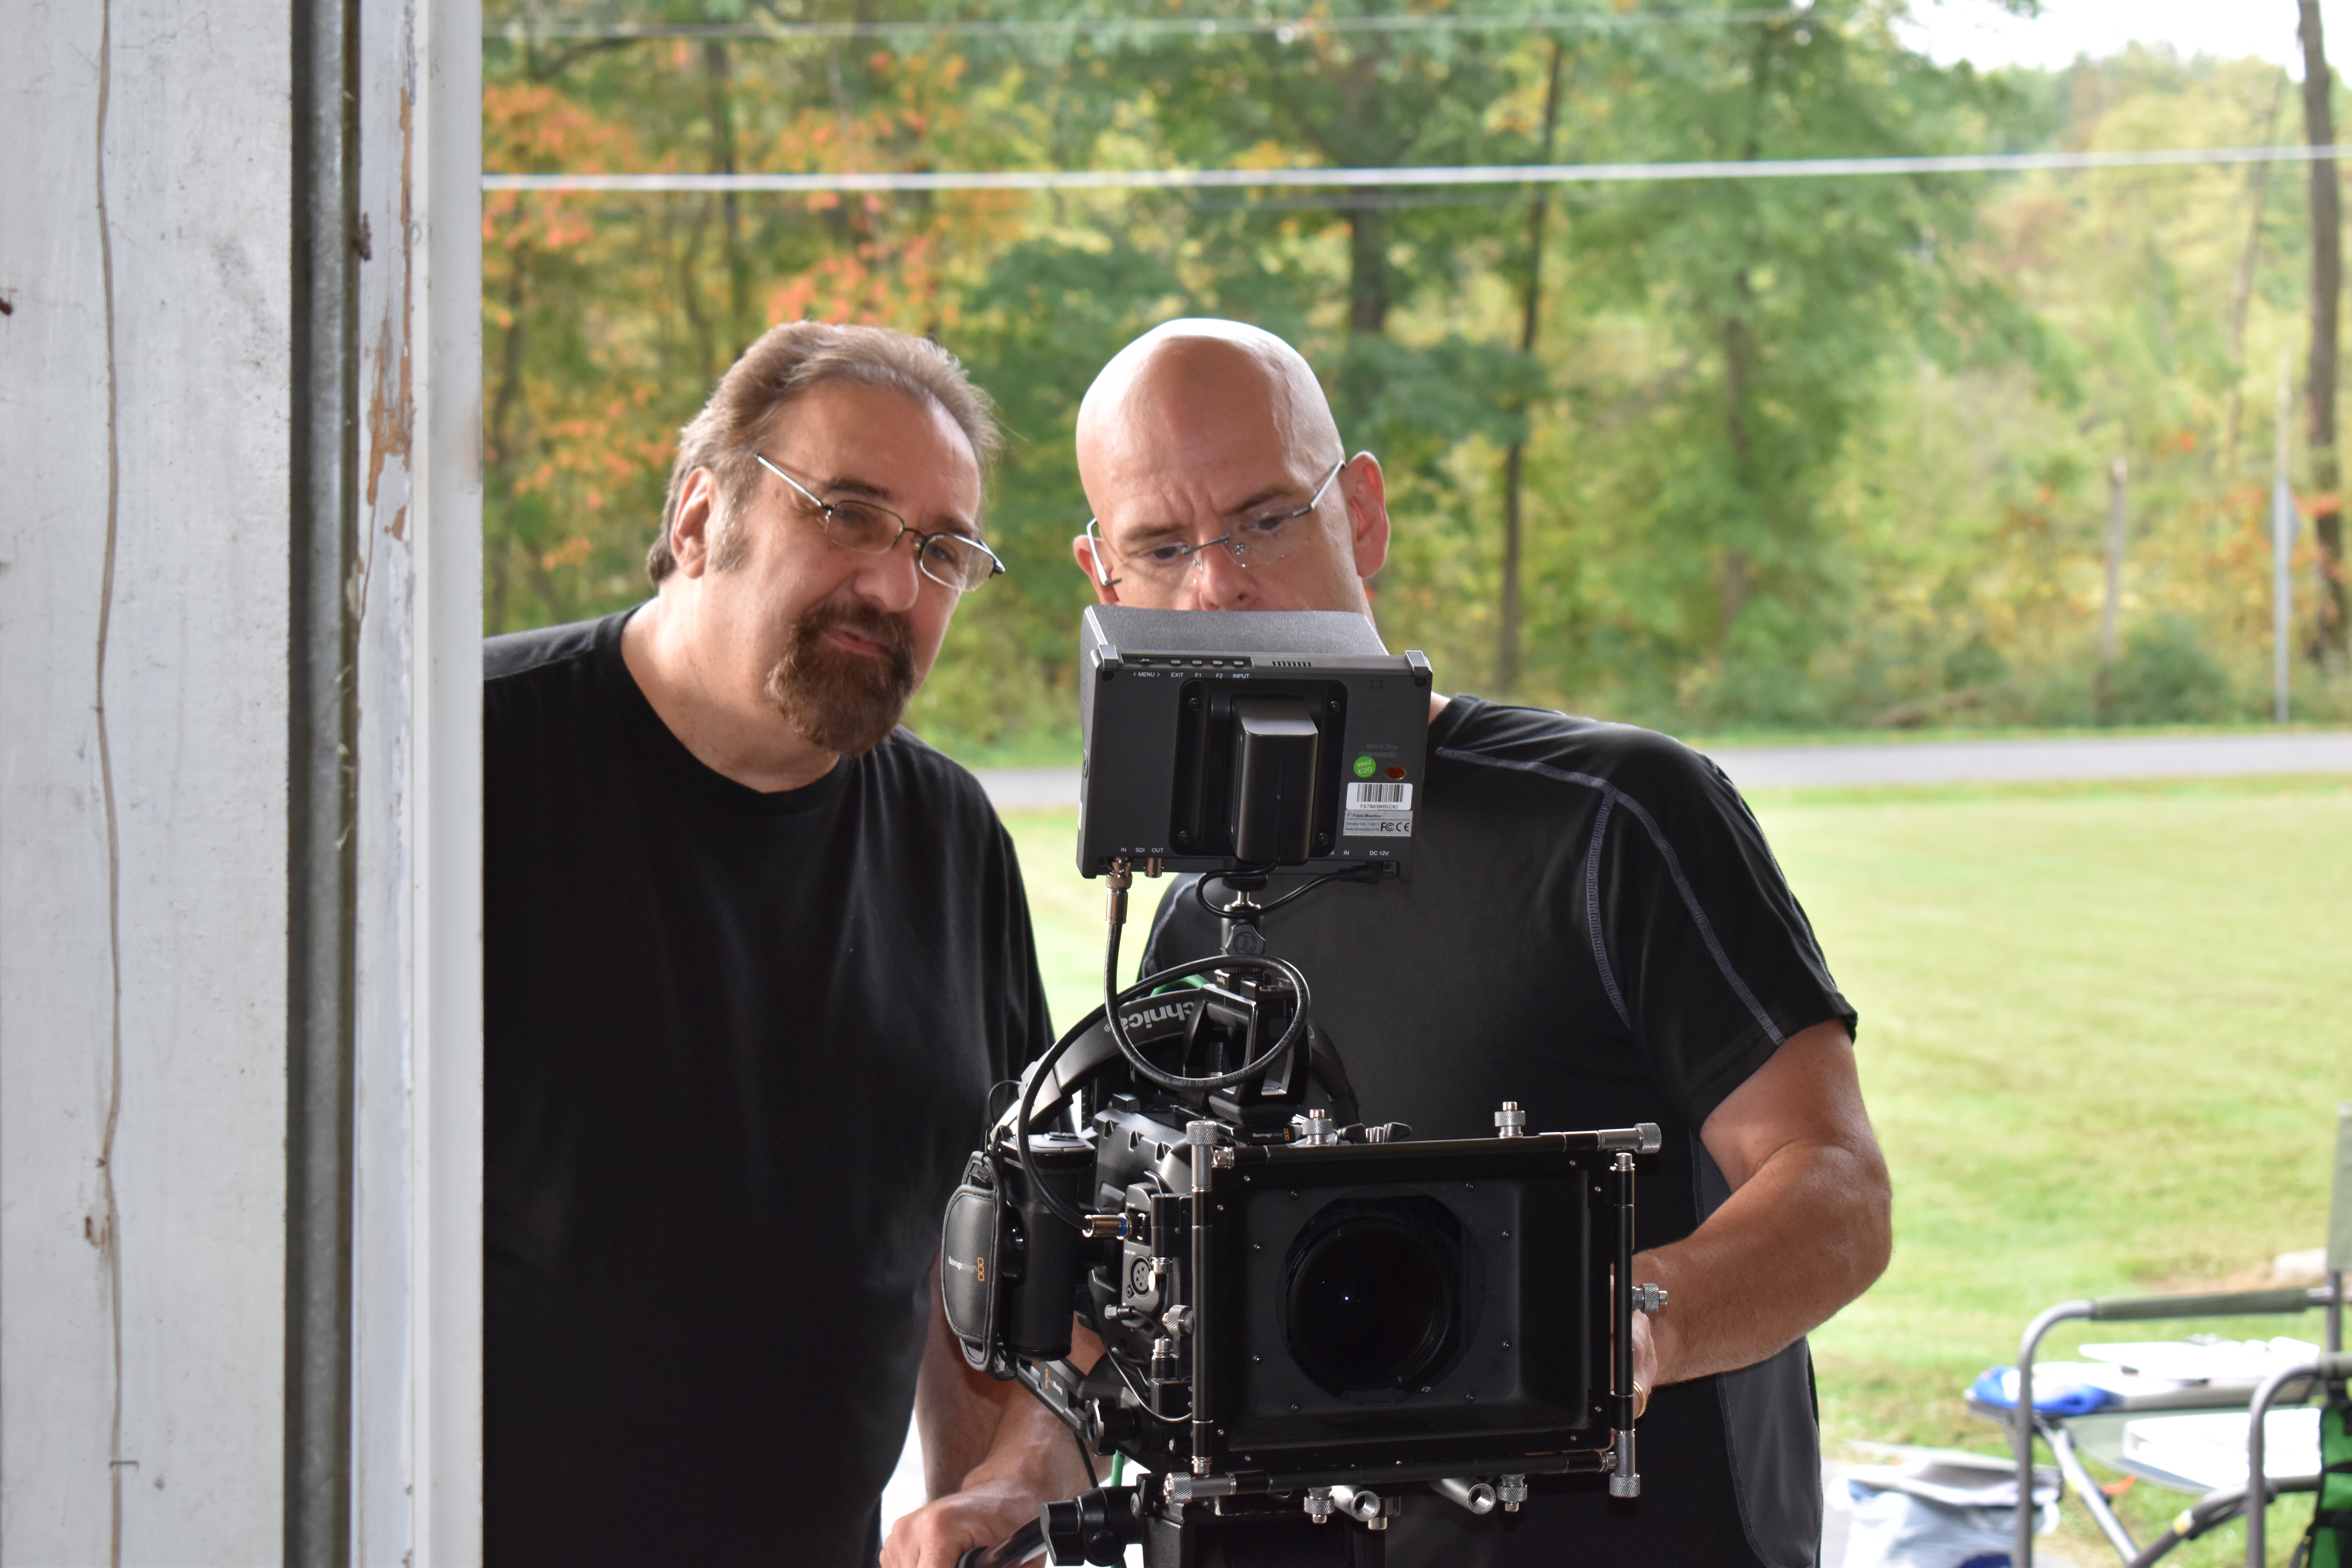 "Finding Purpose: Road to Redemption" director John Reign and cinematographer Bill Schotten review the playback of a scene they have just shot.